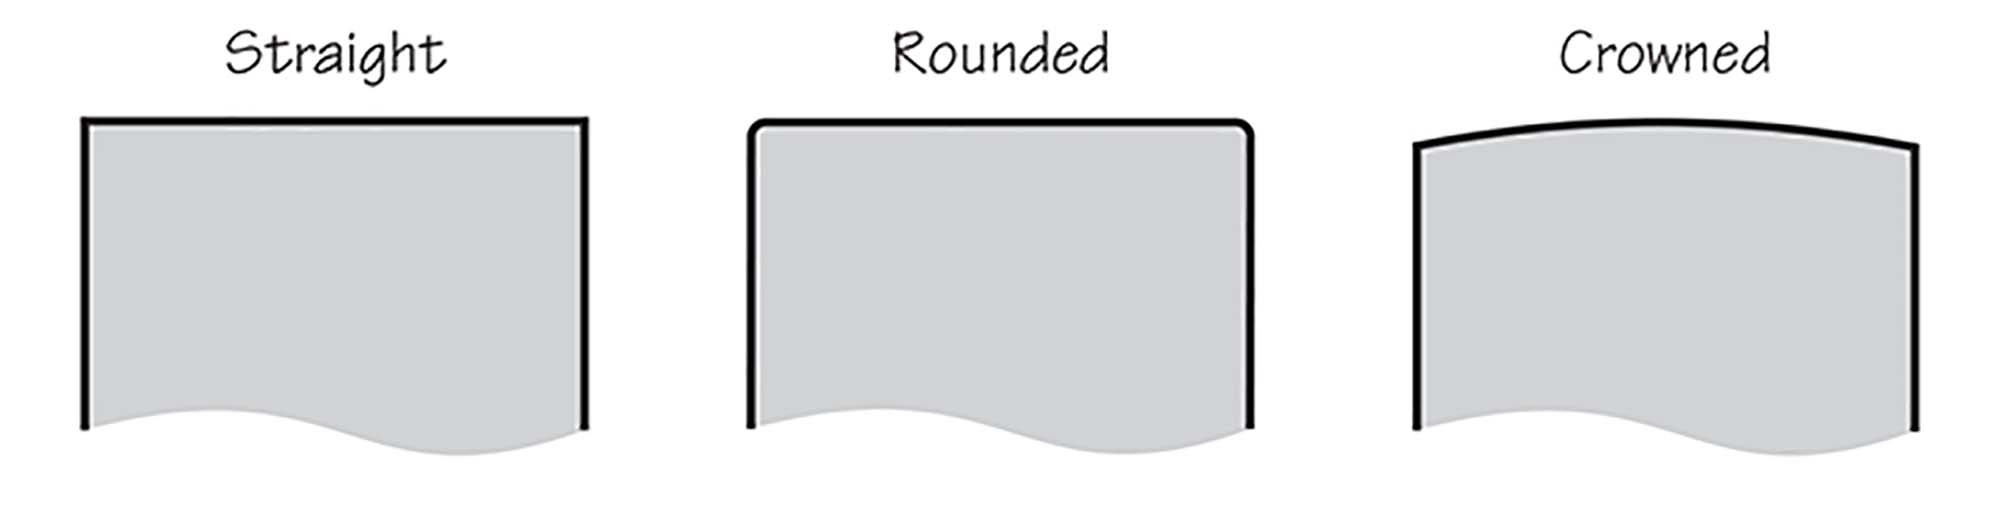 Plane blade shapes: Straight, Rounded or Crowned